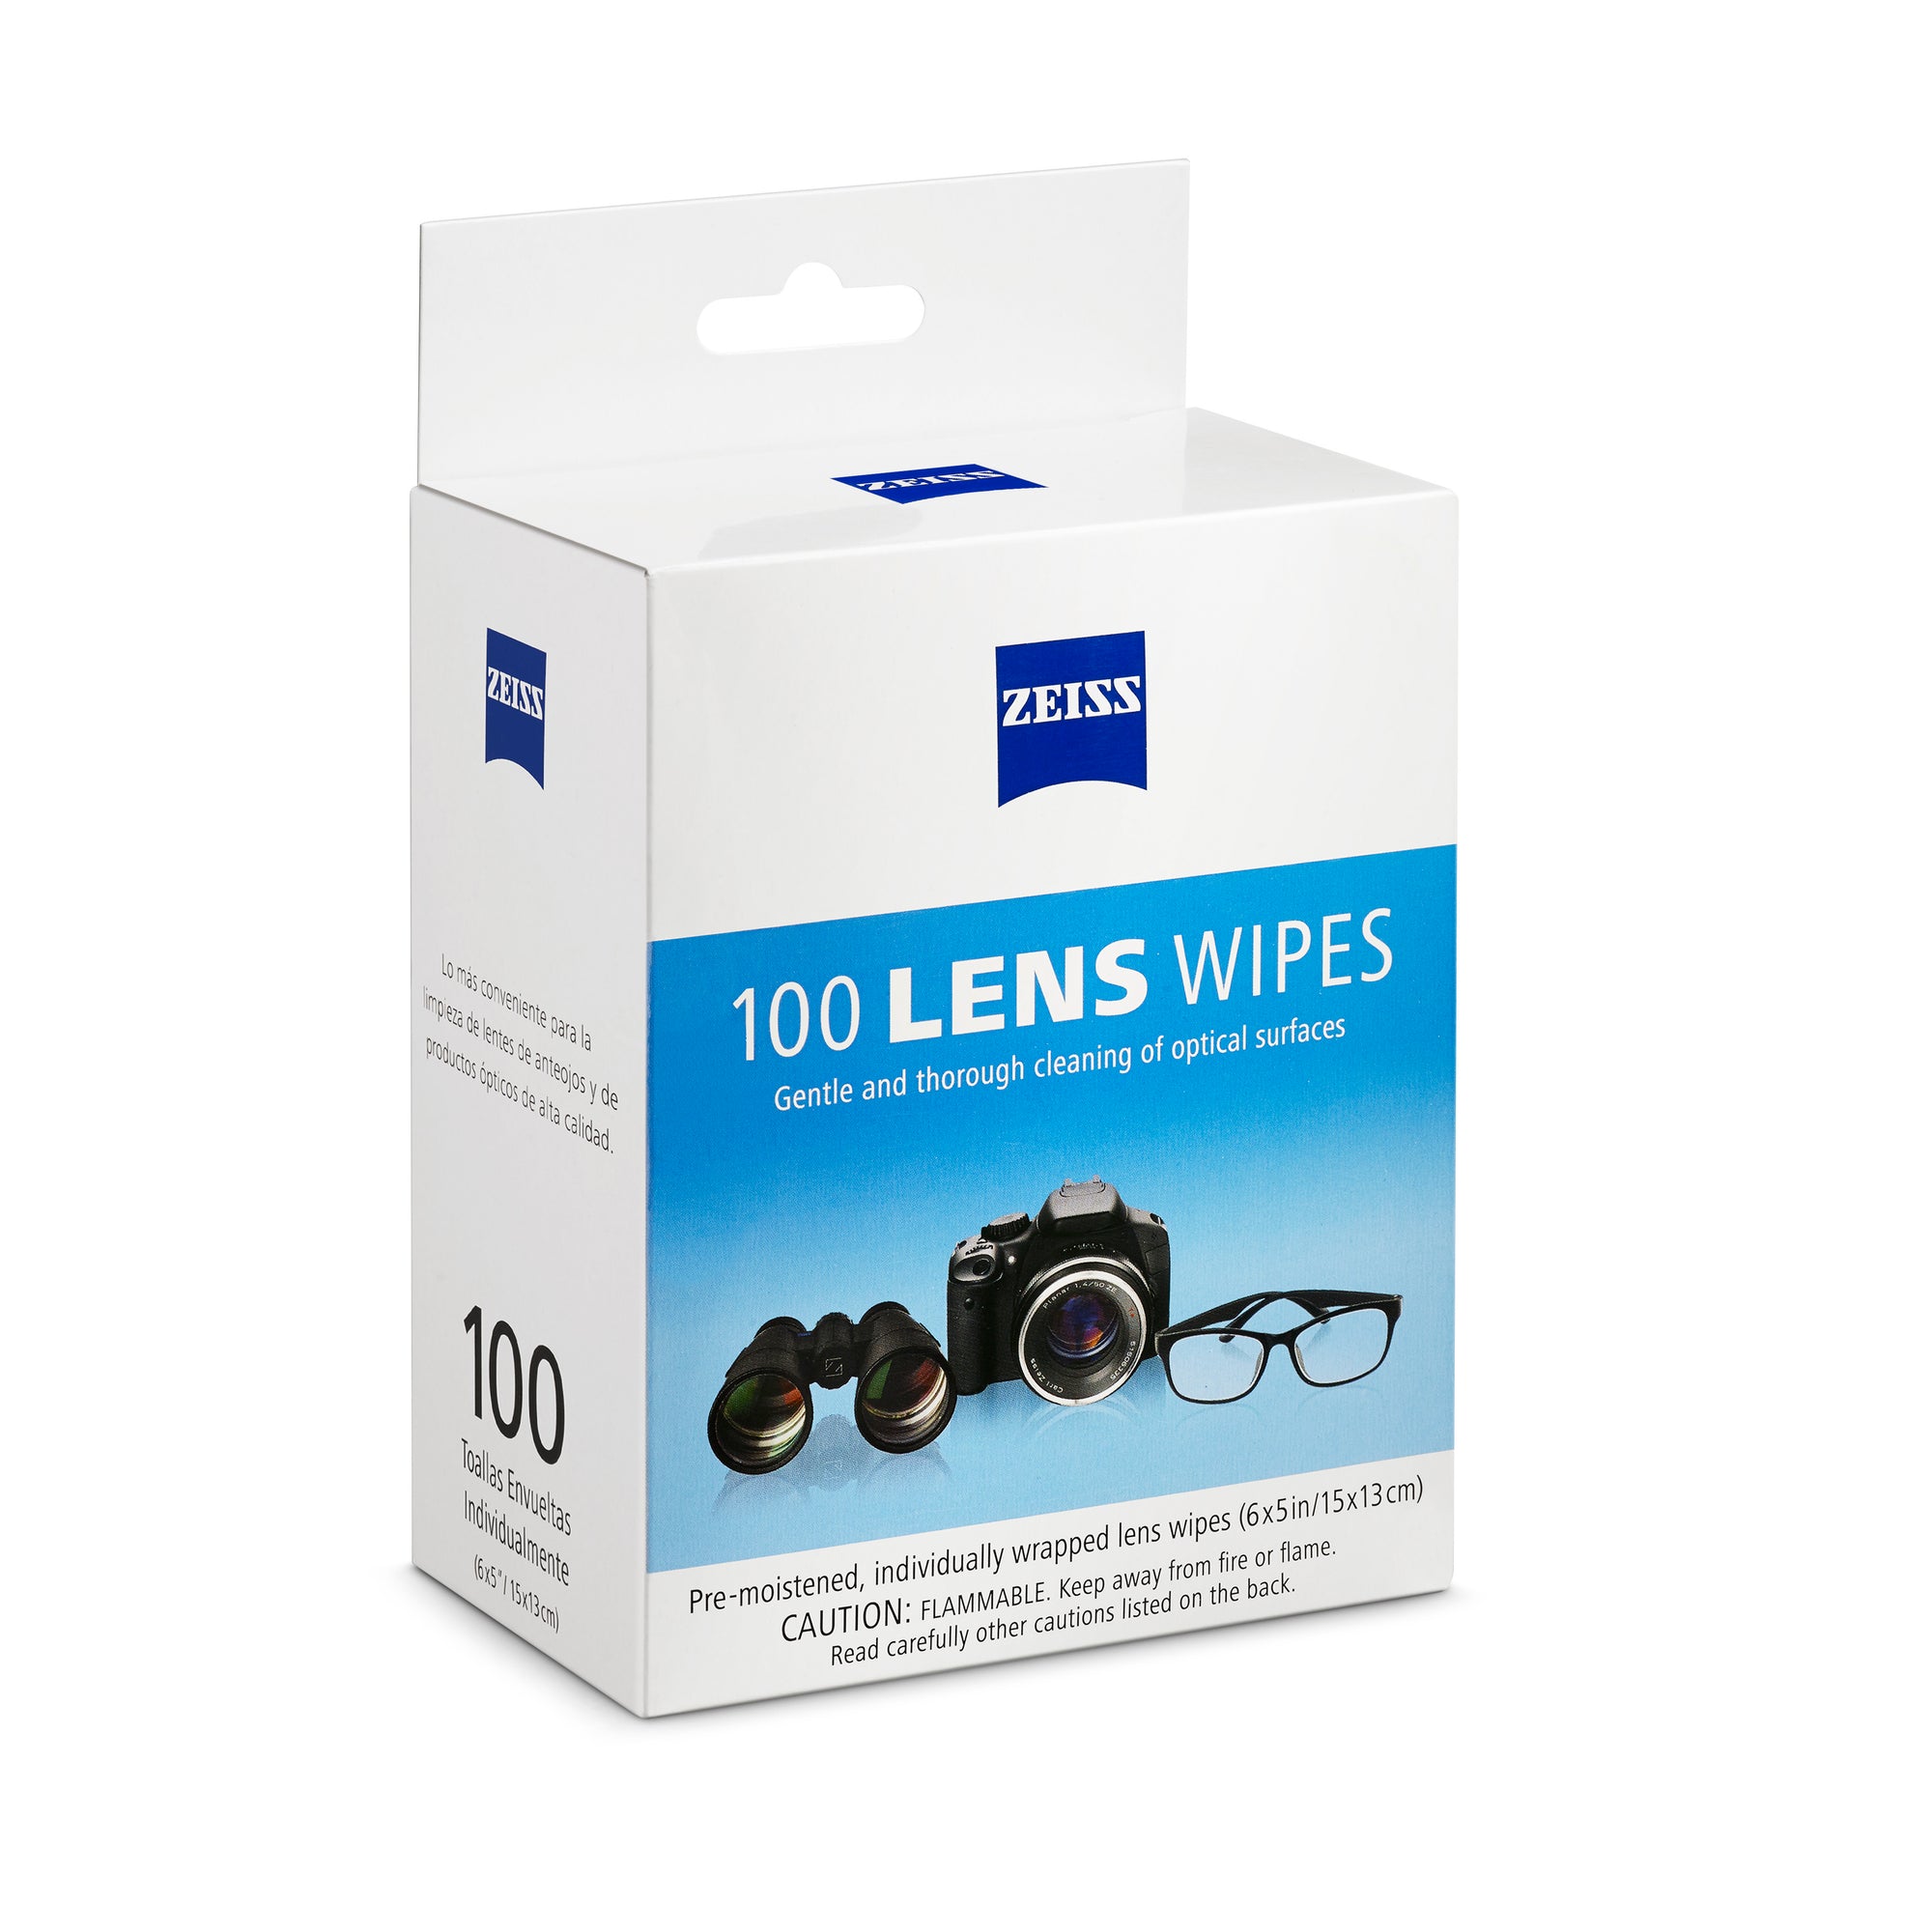 Zeiss Lens Wipes, 100 Ct